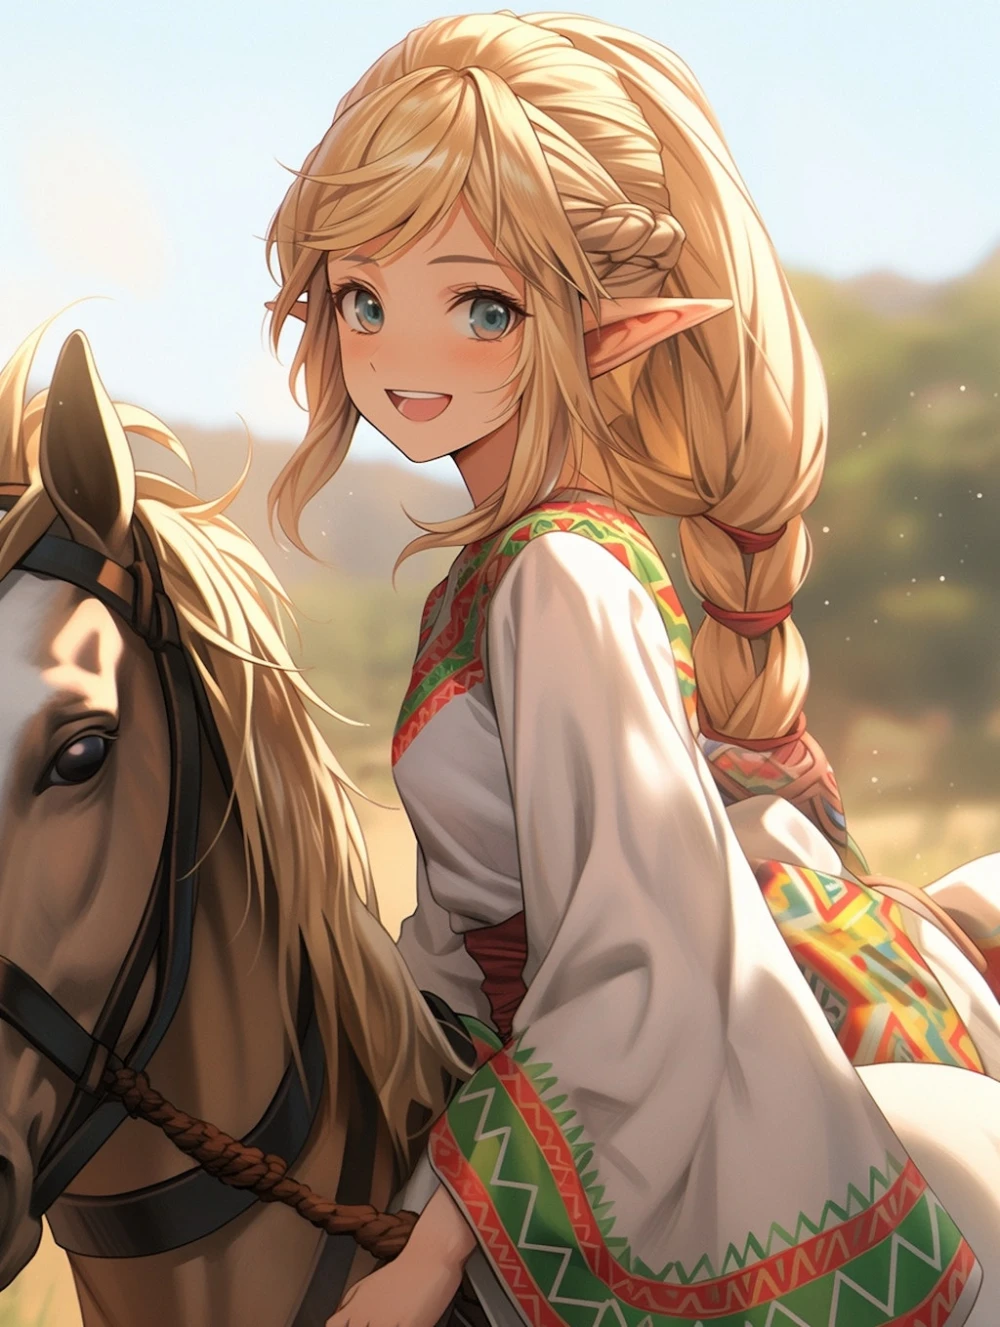 horse-anime-style-all-ages-26